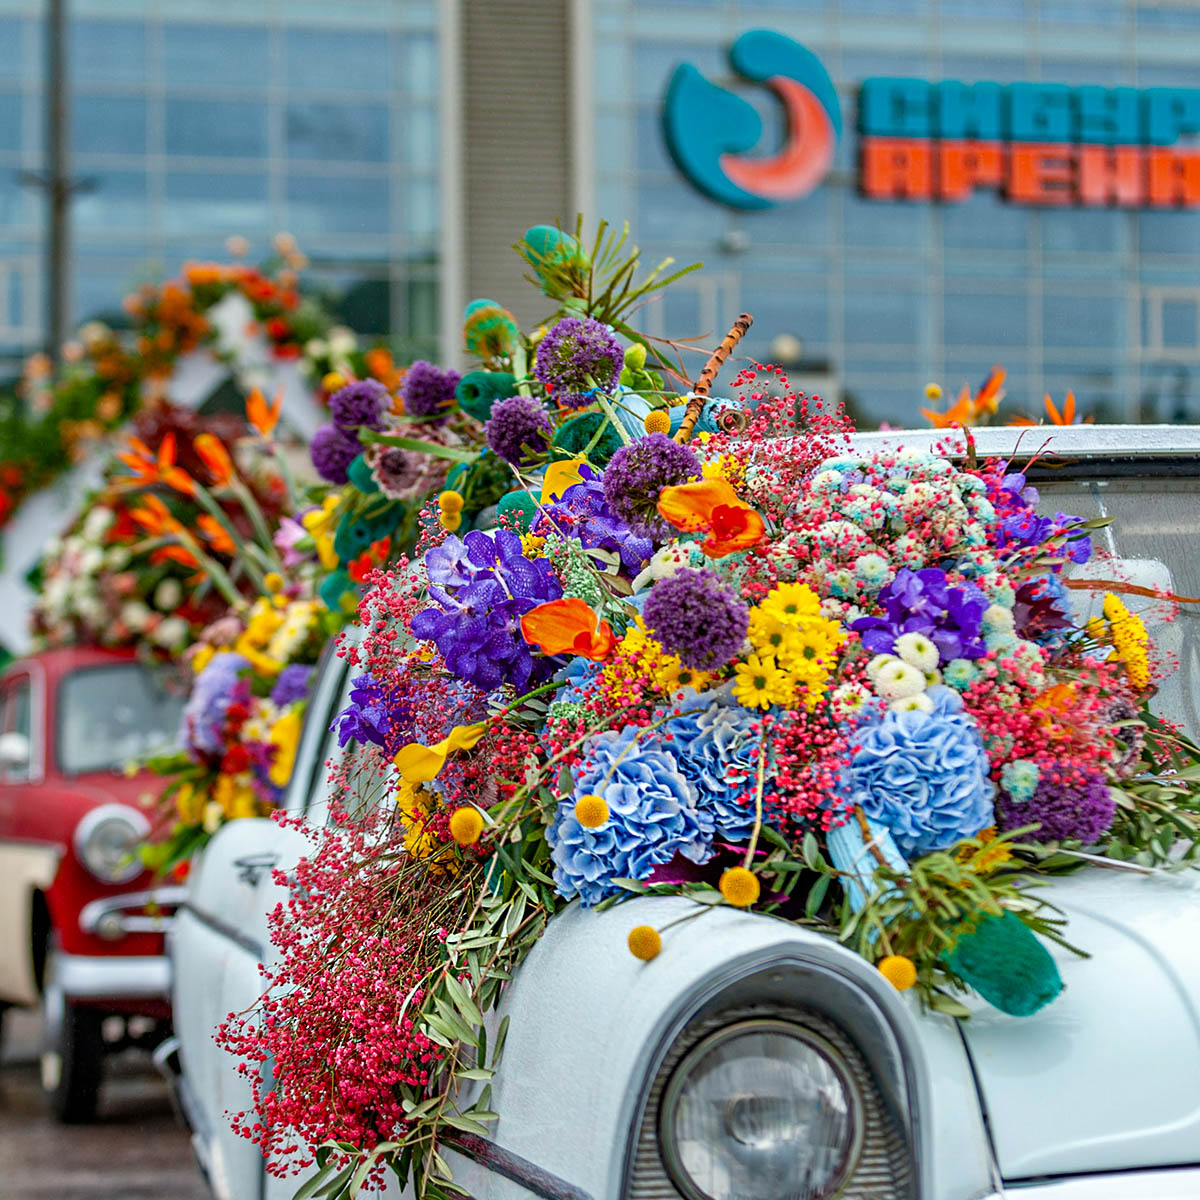 Three Times Is a Charm for Flower Festival St. Petersburg 11